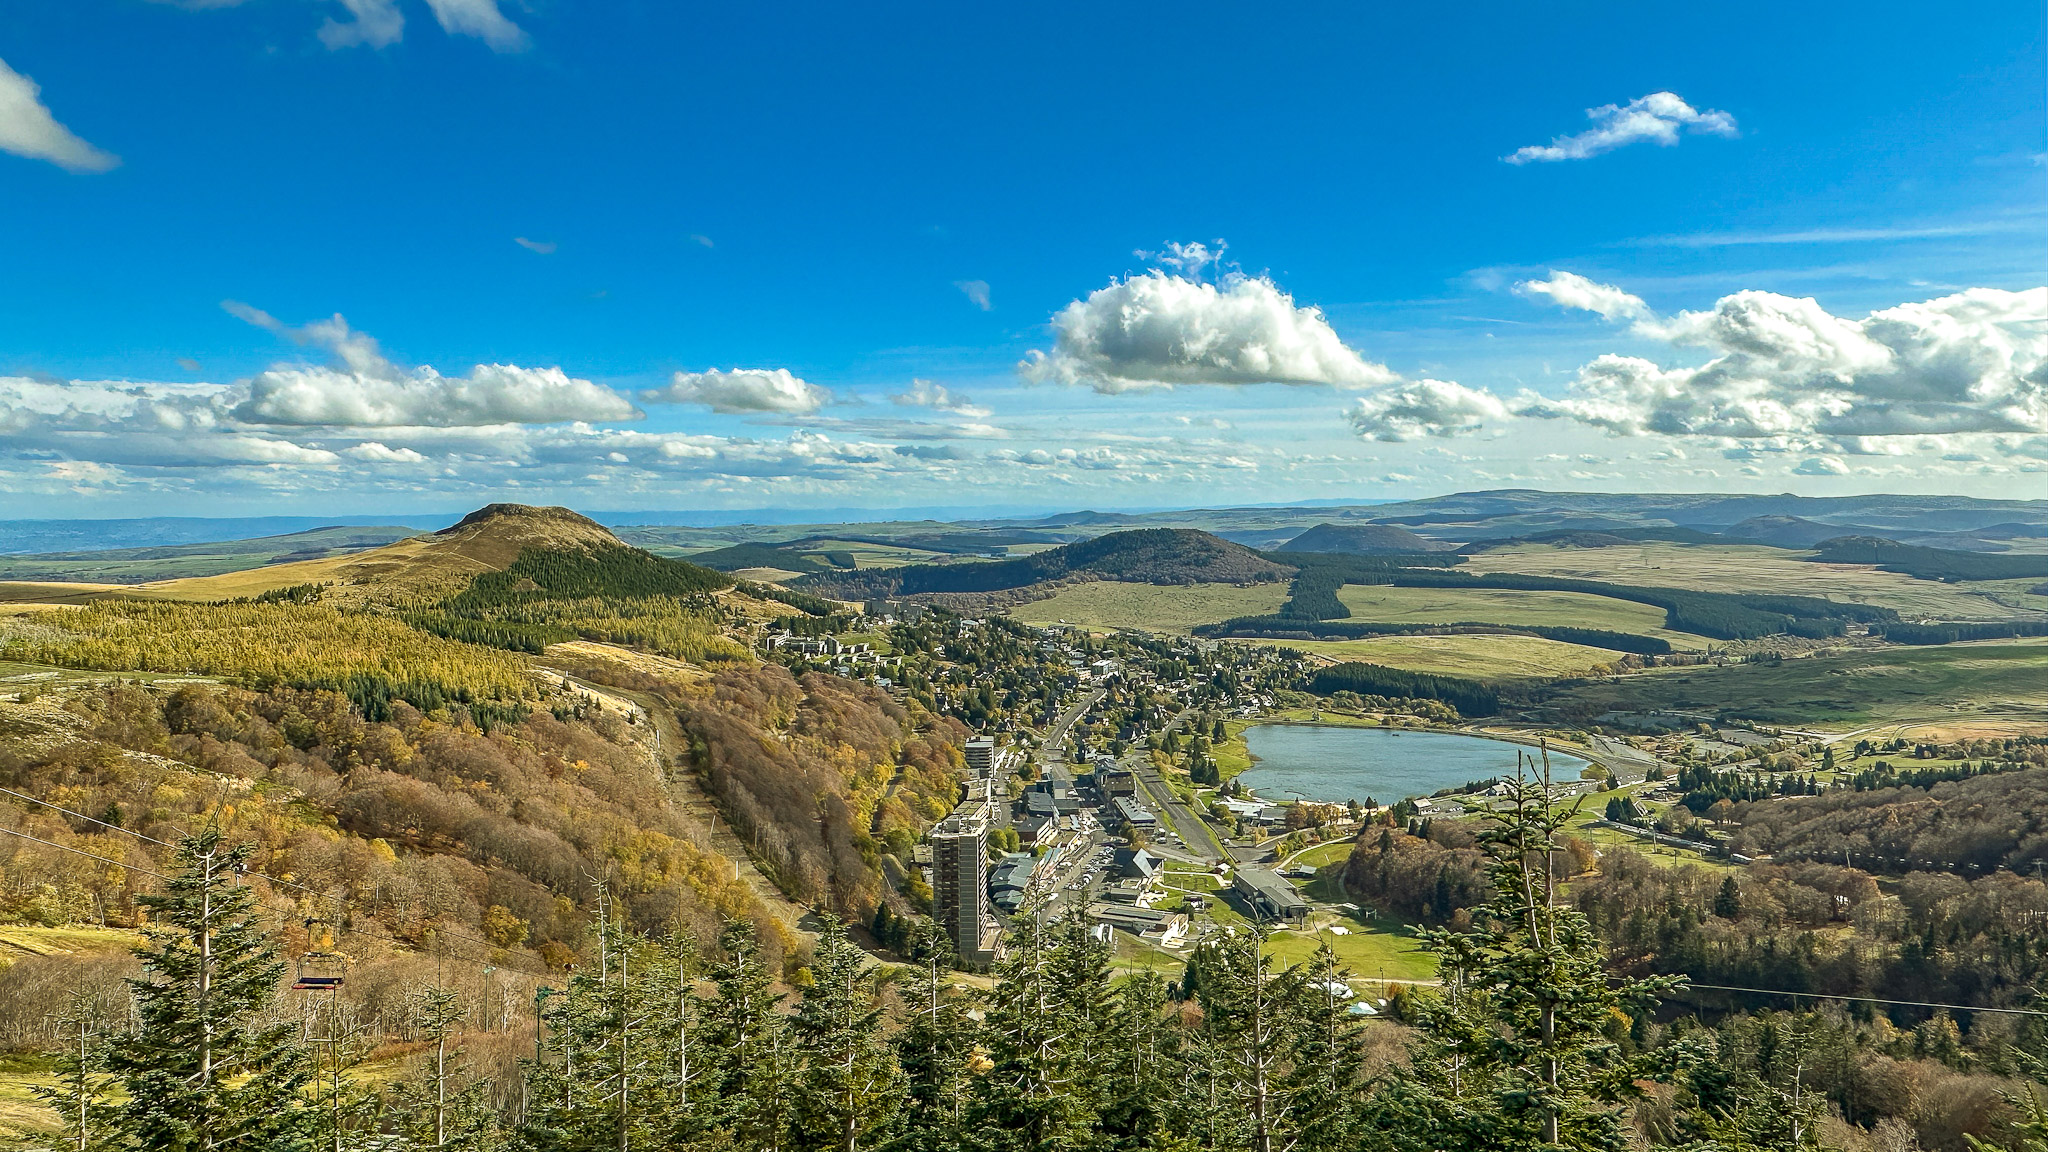 Panorama of the resort of Super Besse in Autumn, town of Super Besse, Lac des Hermines